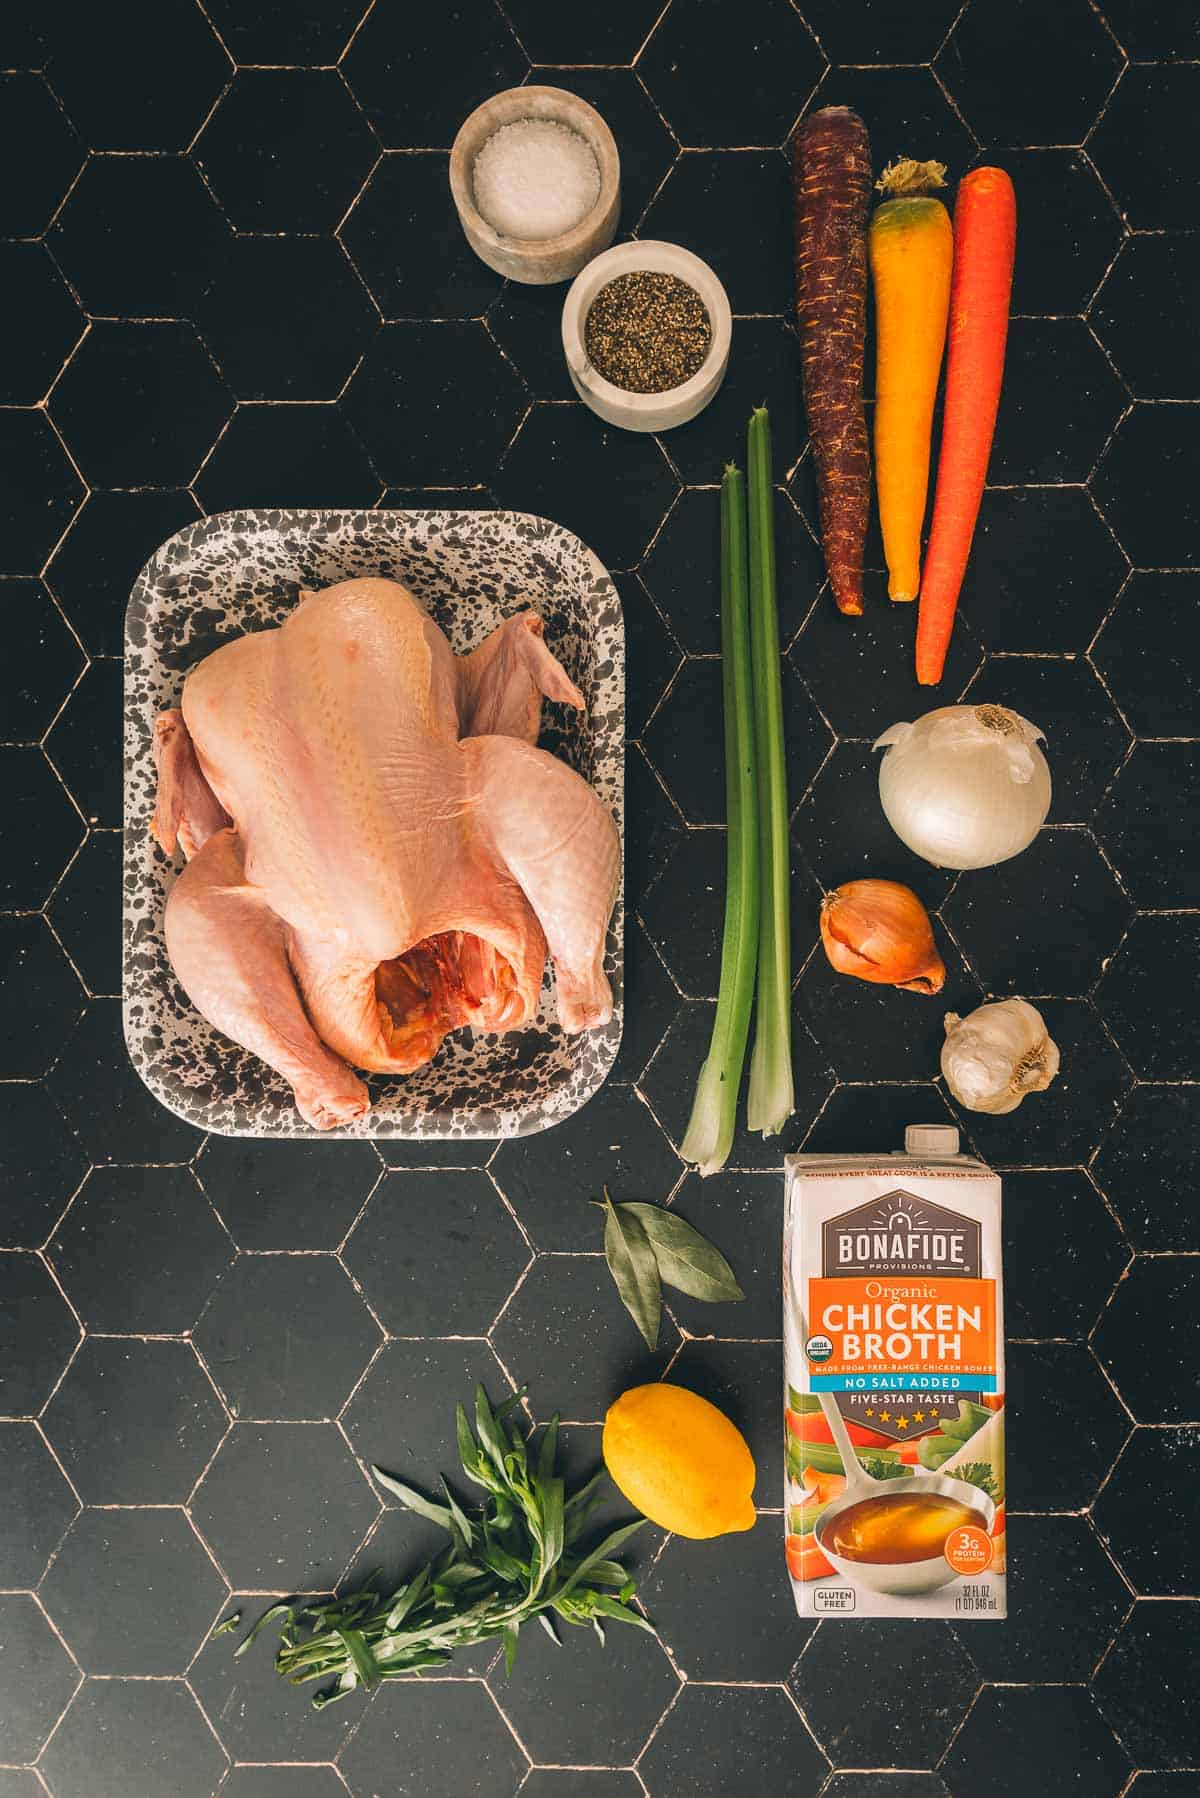 A whole chicken, carrots, celery and other ingredients on a black countertop.